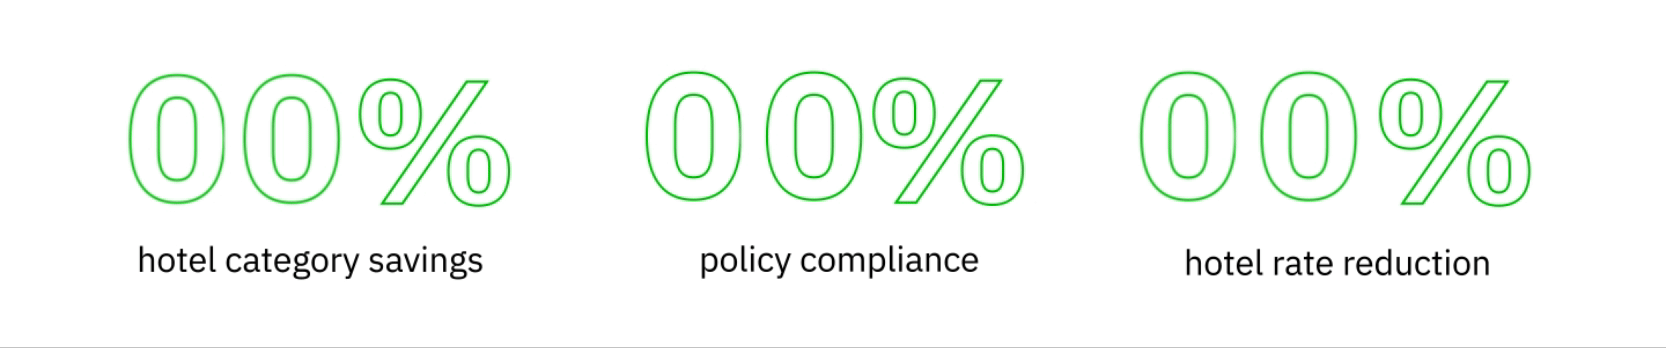 25% hotel category savings, 73% policy compliance and 93% hotel rate reduciton